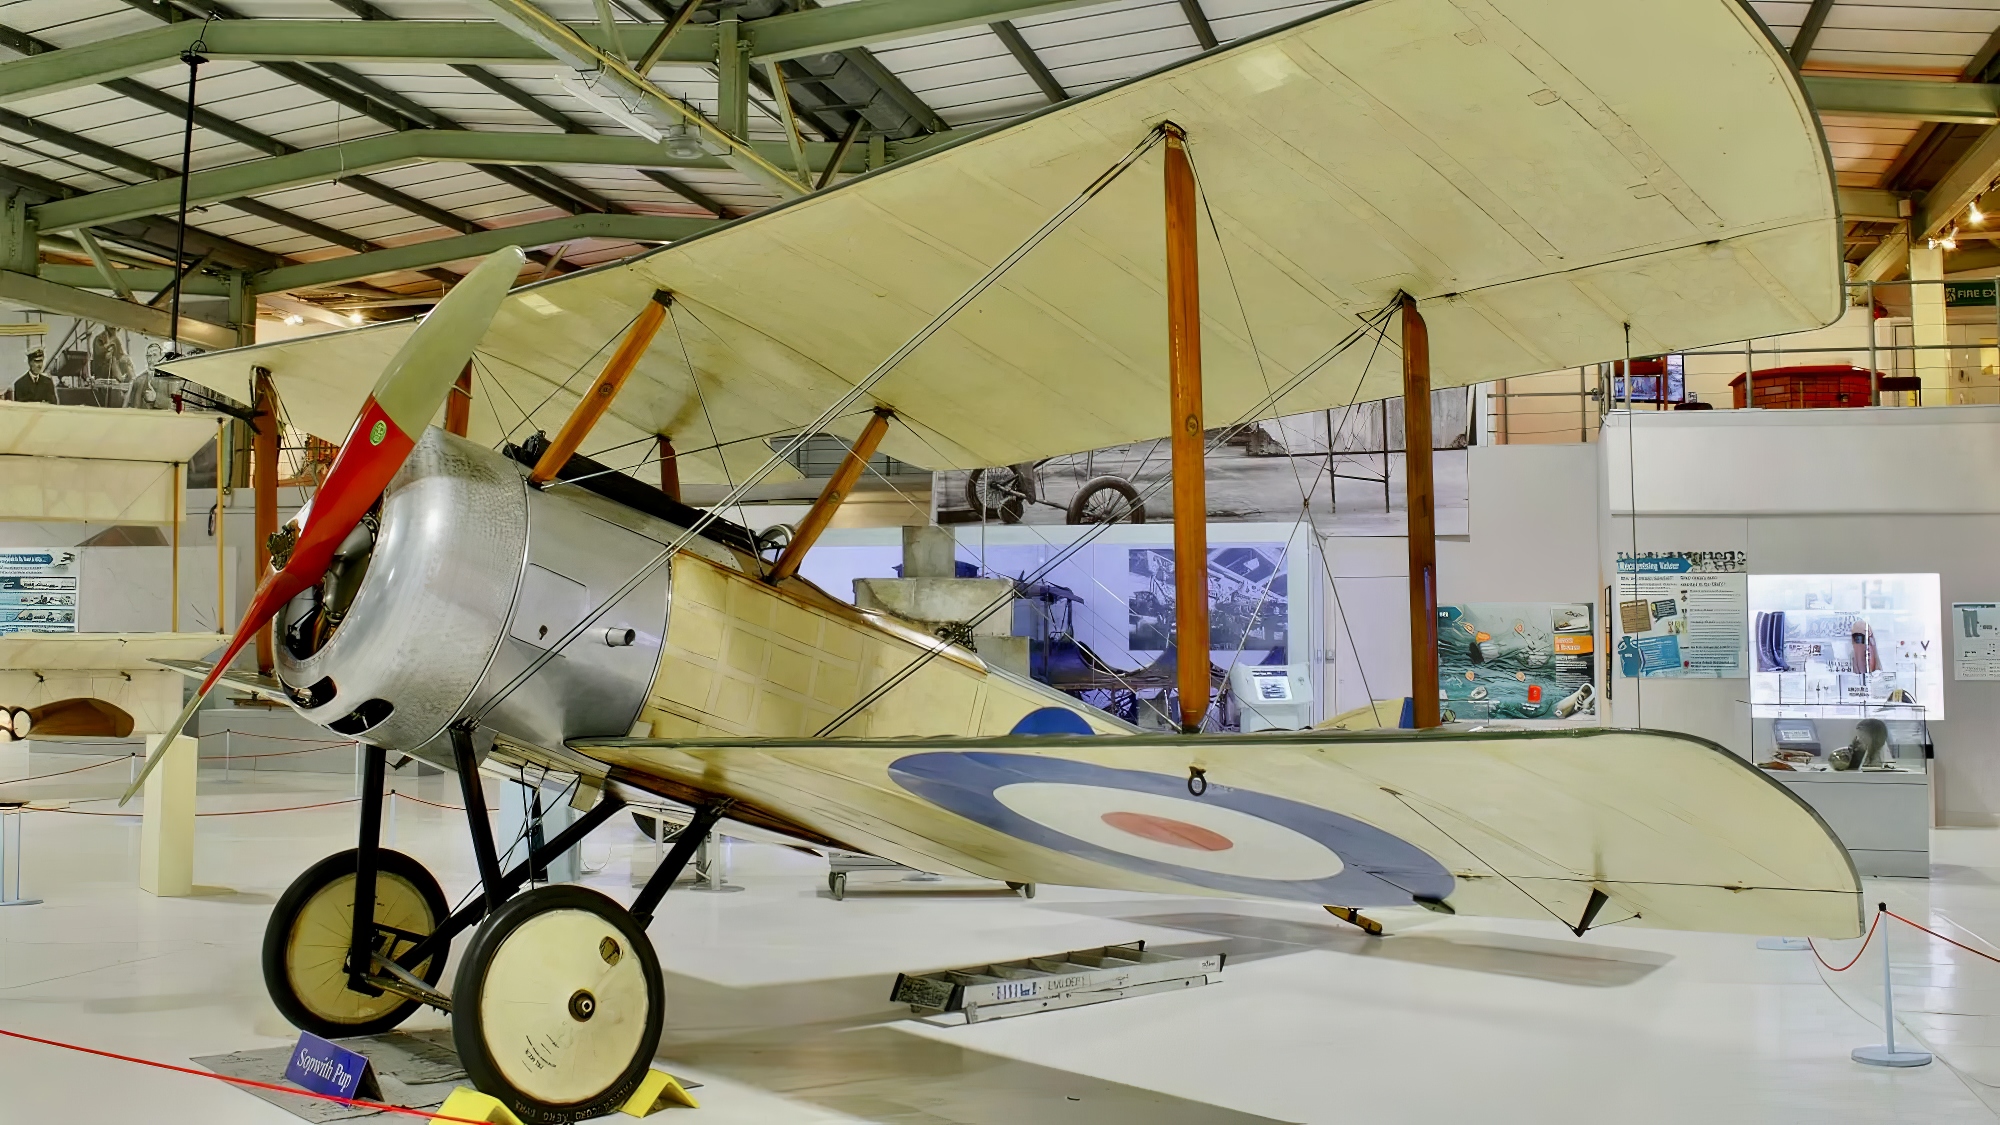 Sopwith Pup replica N6542 G-BIAU forms part of the Fleet Air Arm Museum collection